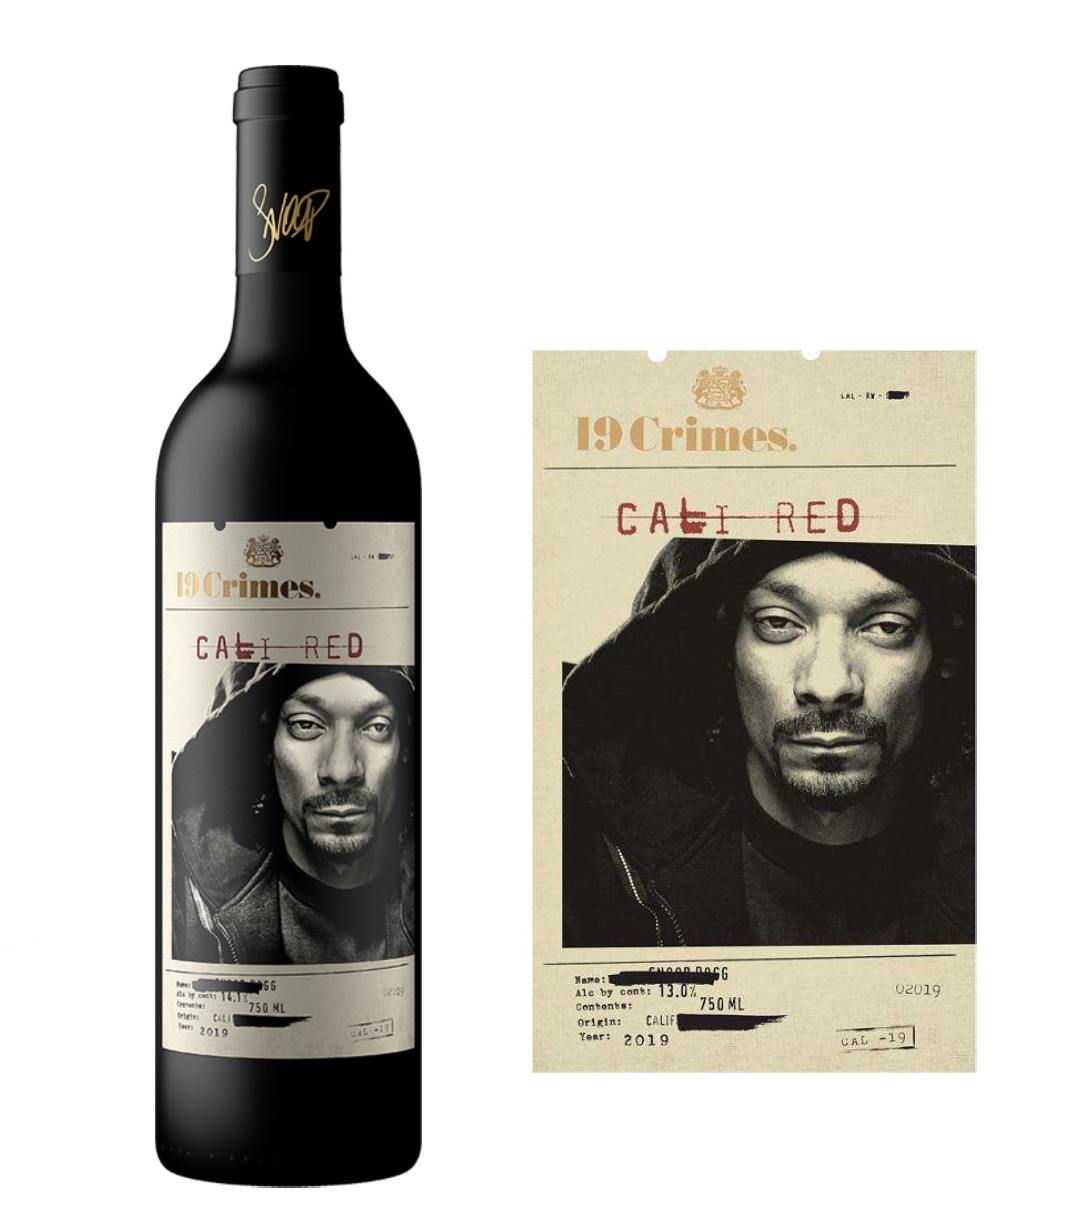 19-crimes-cali-red-wine-by-snoop-dogg-a-smooth-bold-blend